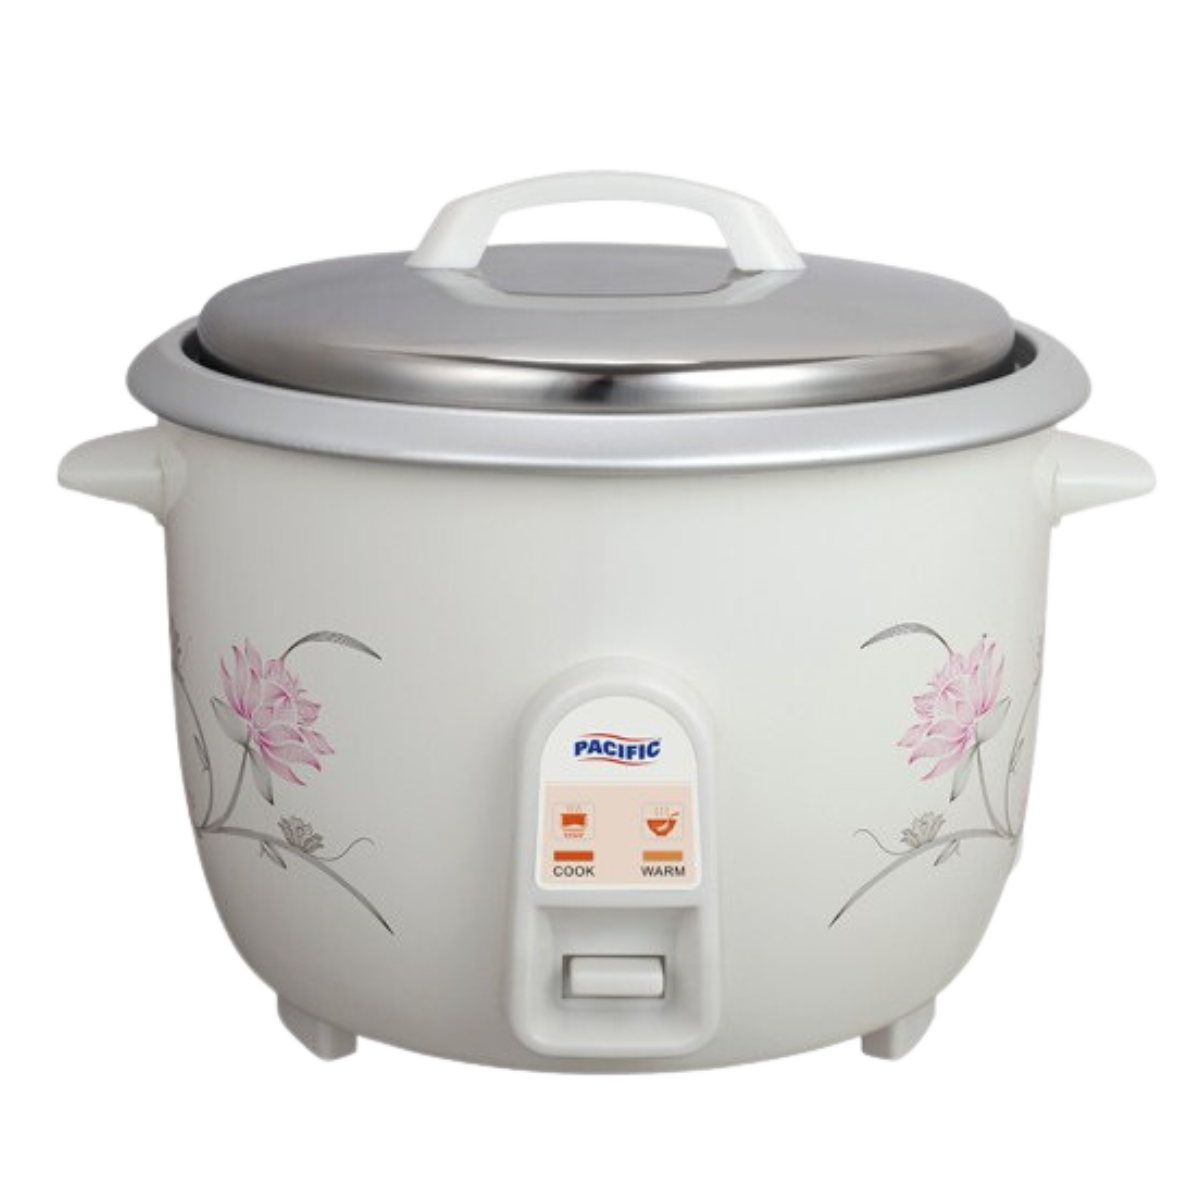 PACIFIC PCK900 RICE COOKER 5.6LTS